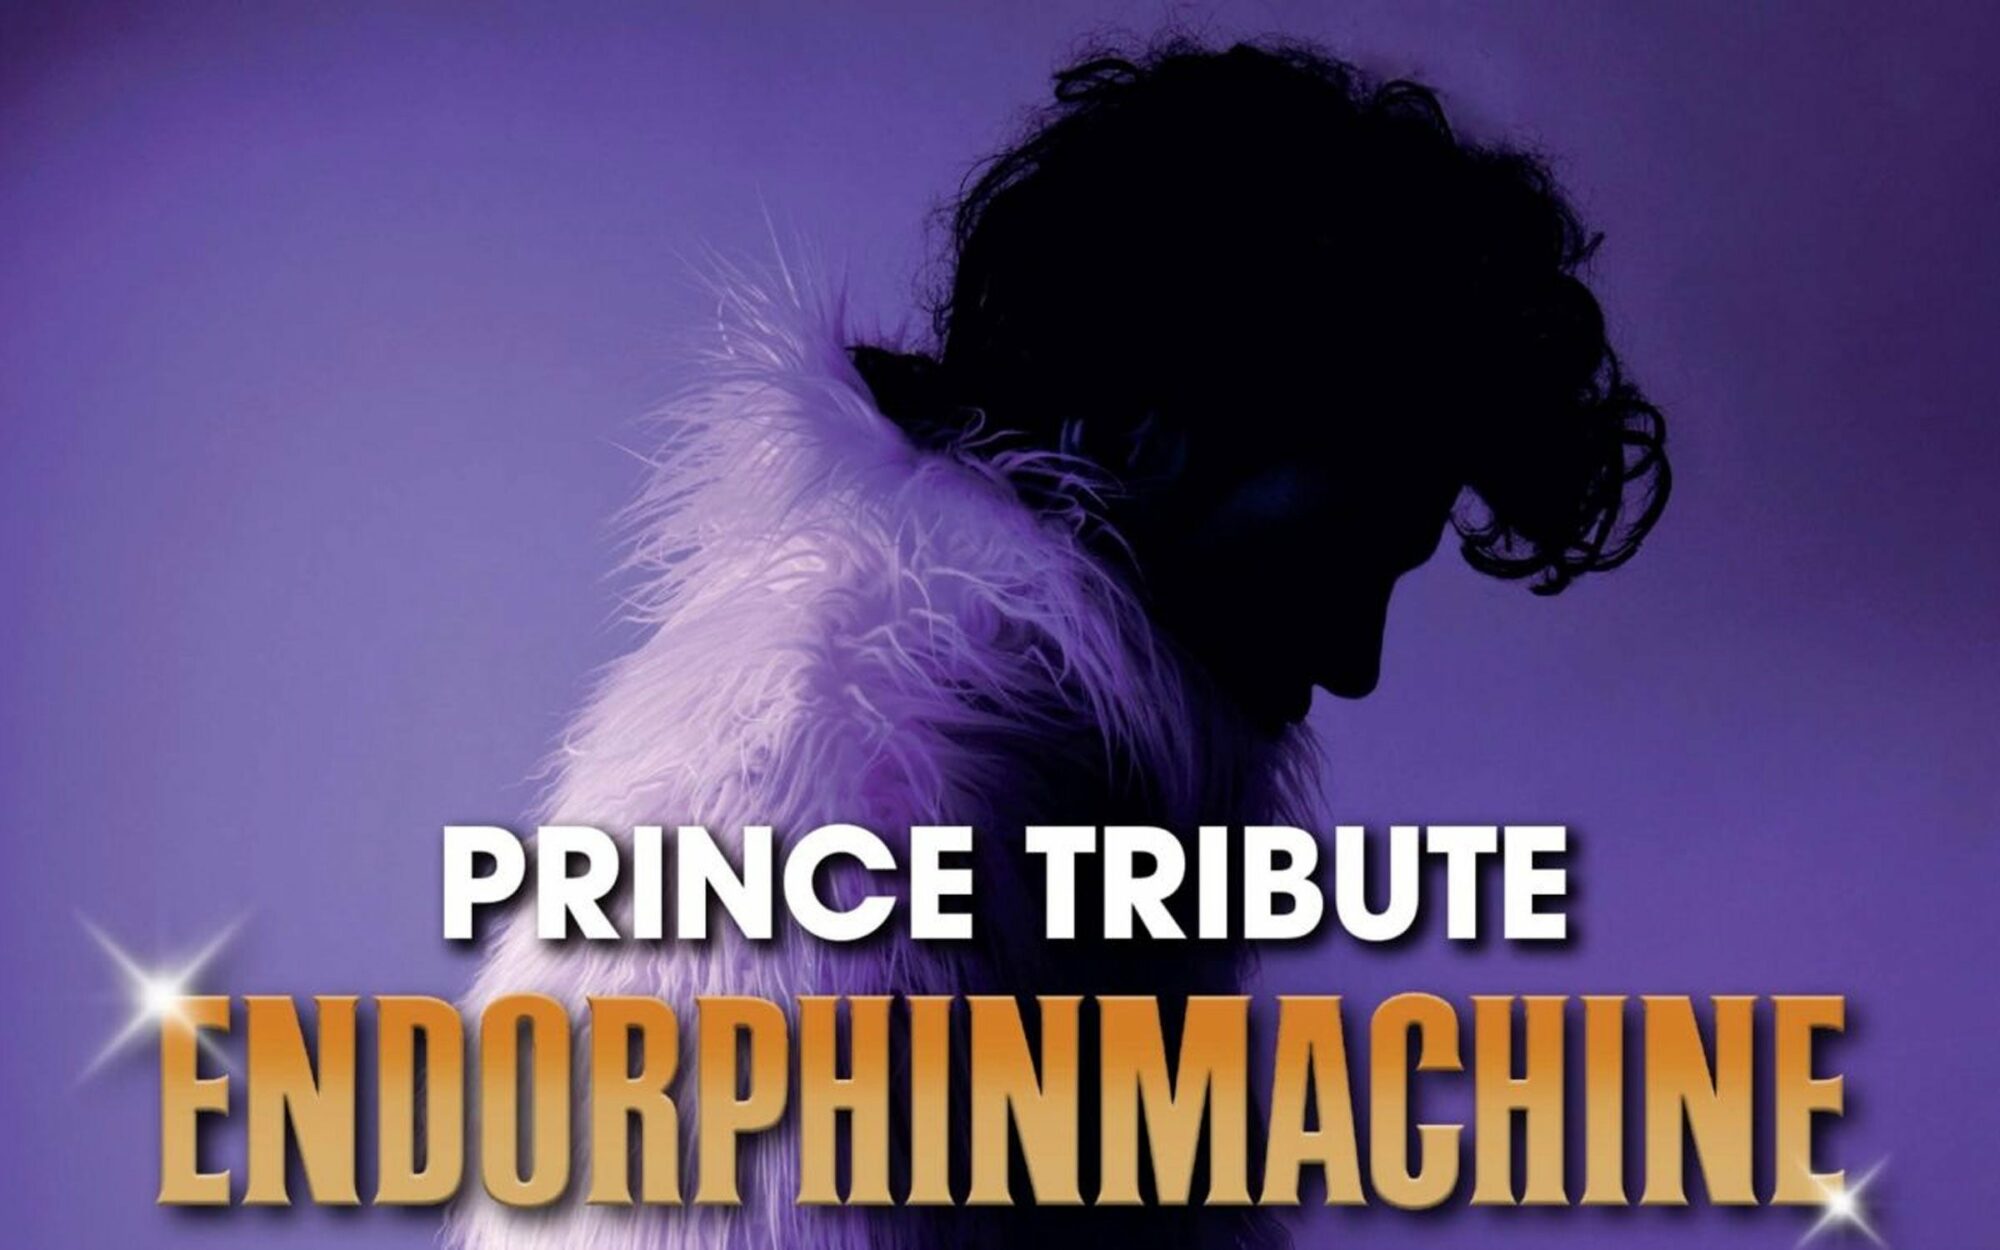 Image name Prince Tribute Endorphinmachine at O2 Academy2 Sheffield Sheffield the 1 image from the post Prince Tribute... Endorphinmachine at O2 Academy2 Sheffield, Sheffield in Yorkshire.com.